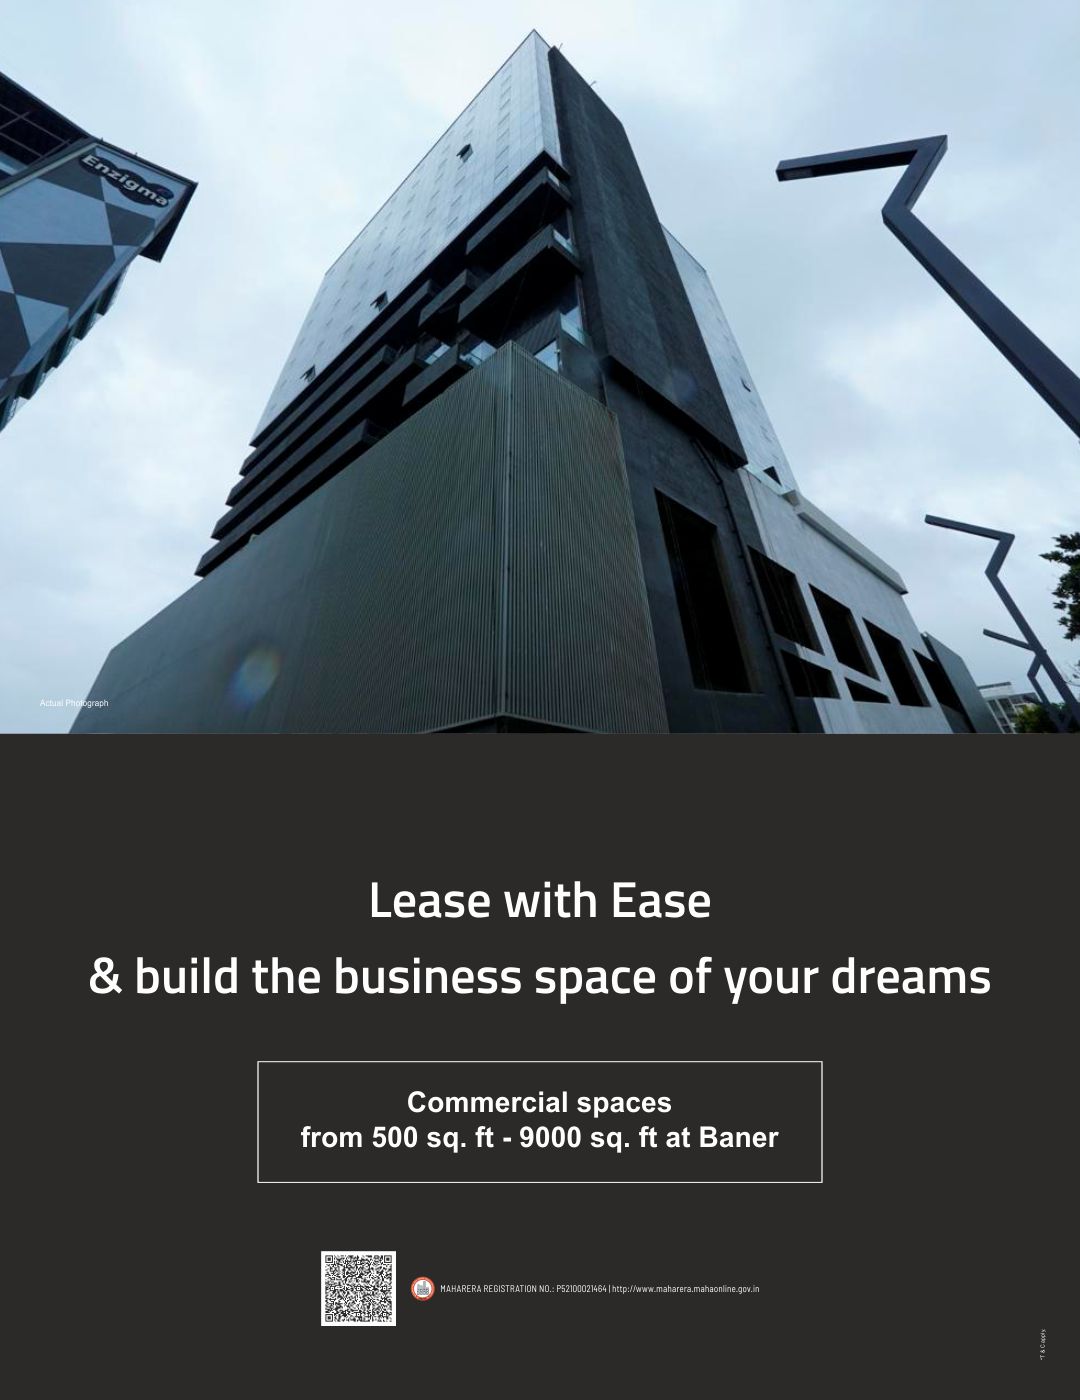 Commercial Property & Office Spaces for Sale in Baner, Pune